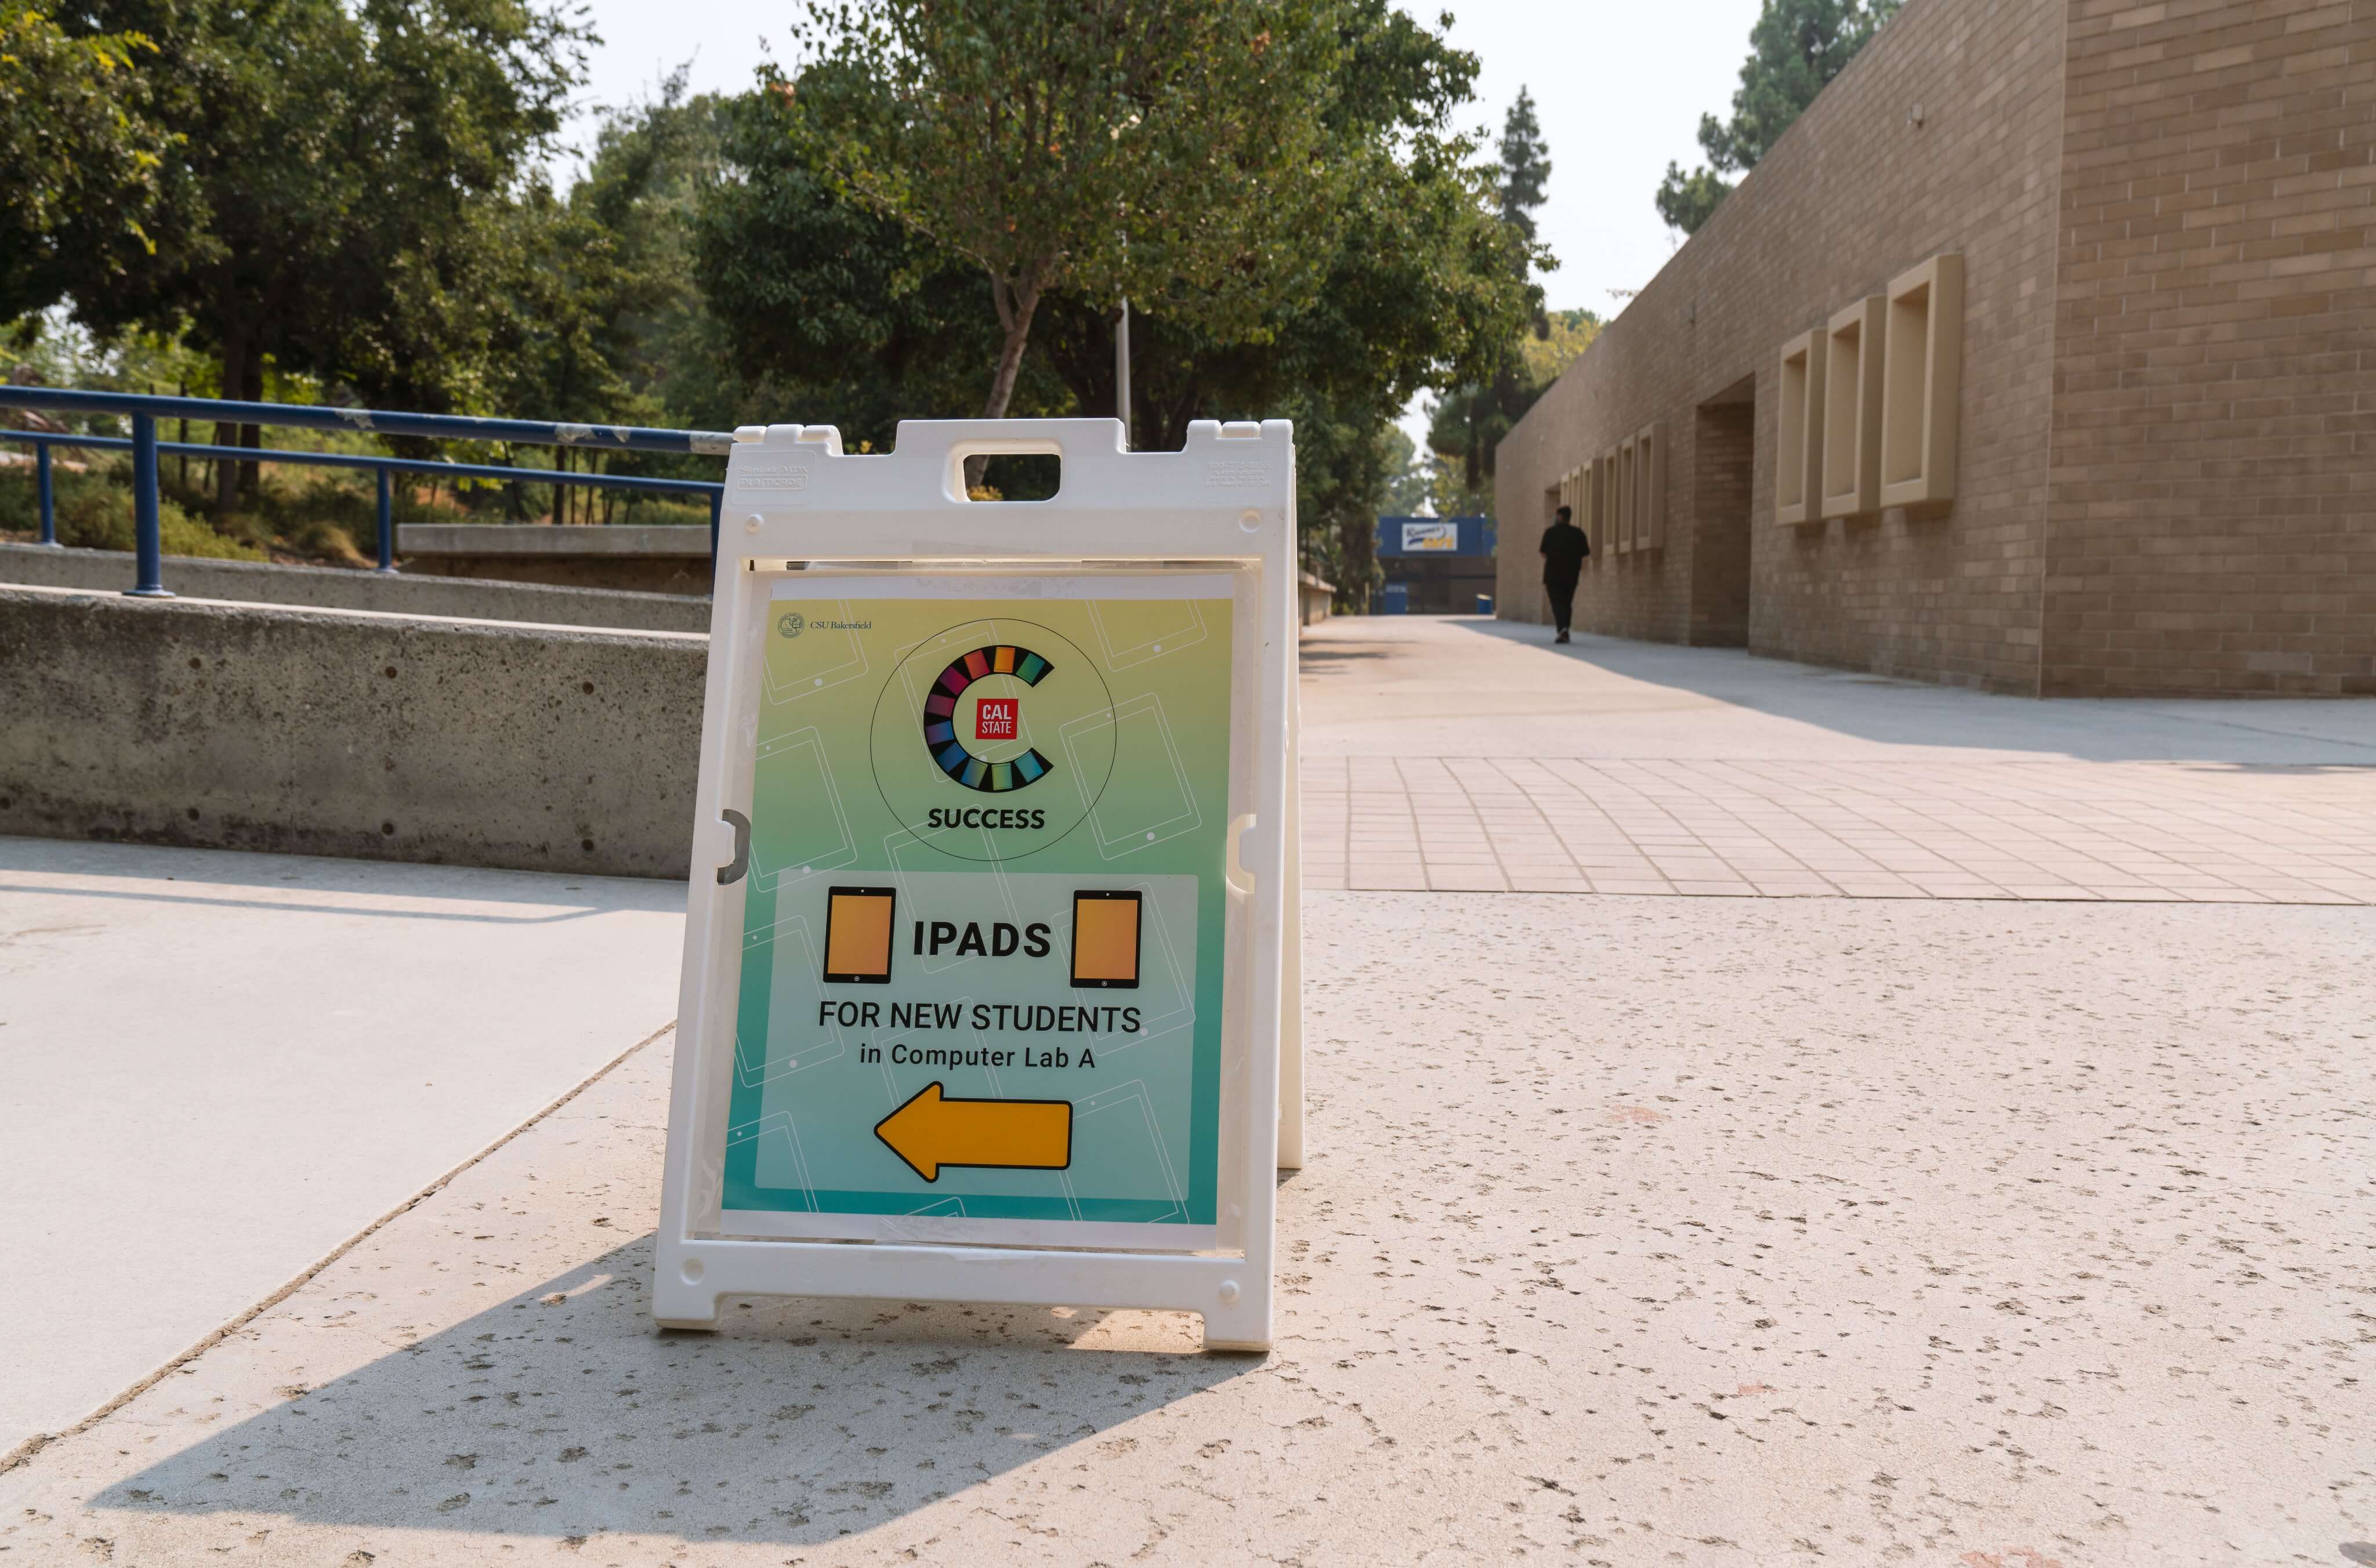 easel sign advertising new ipads for students sits on concrete pathway of a college campus